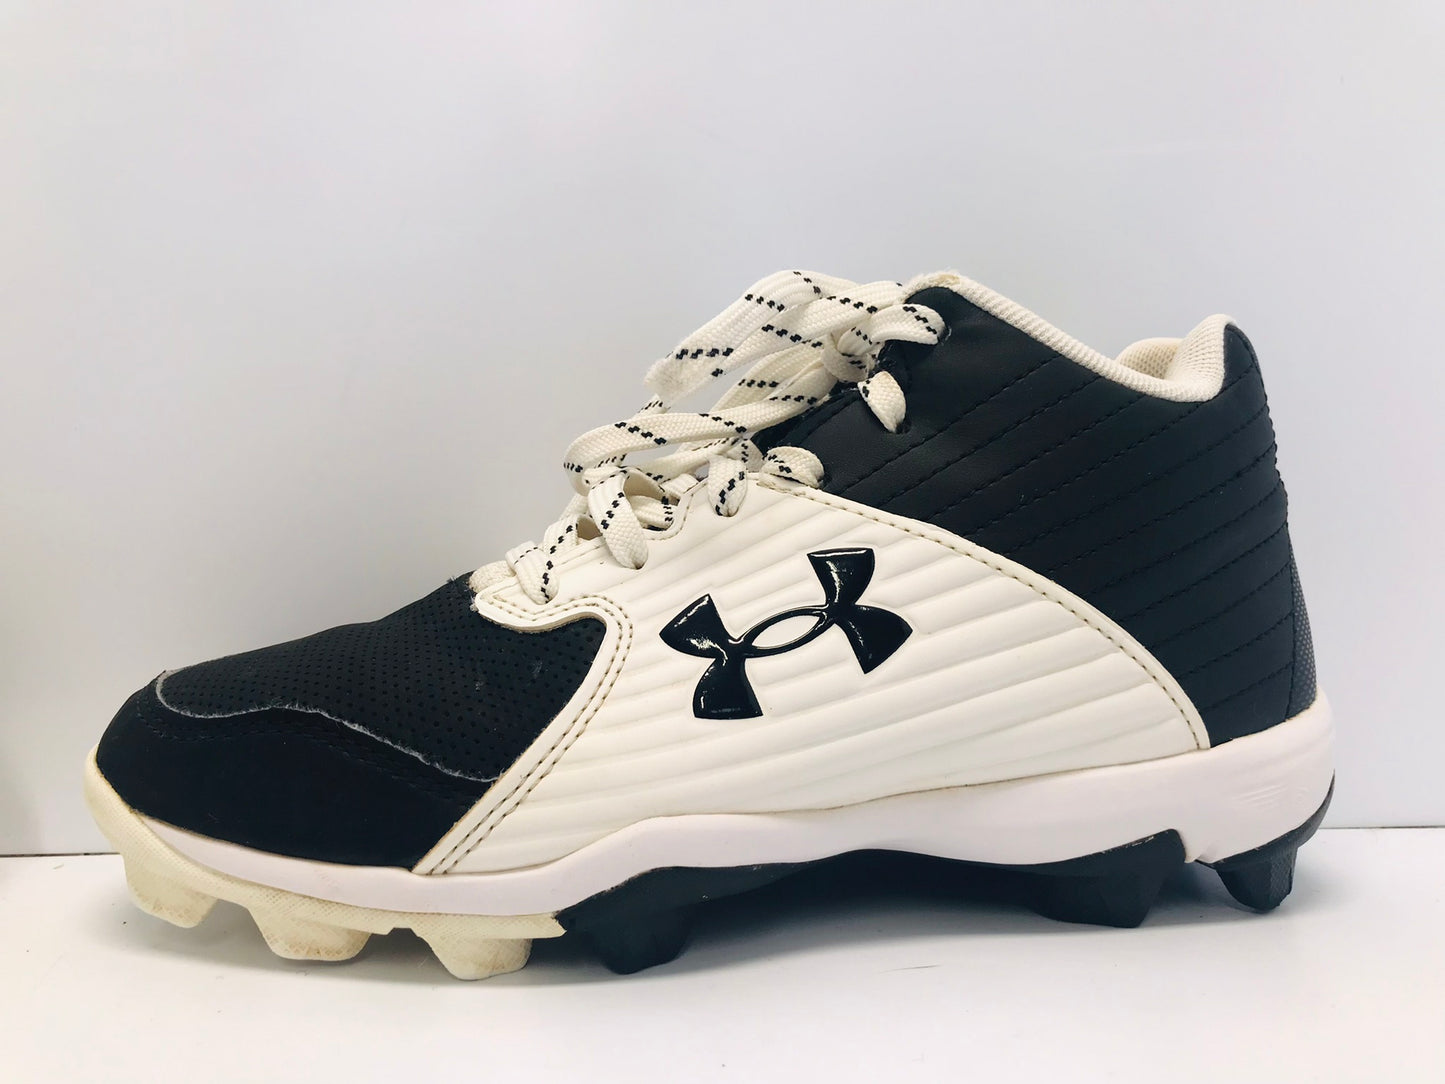 Baseball Shoes Cleats Child Size 4  Under Armour Lead Off Black White